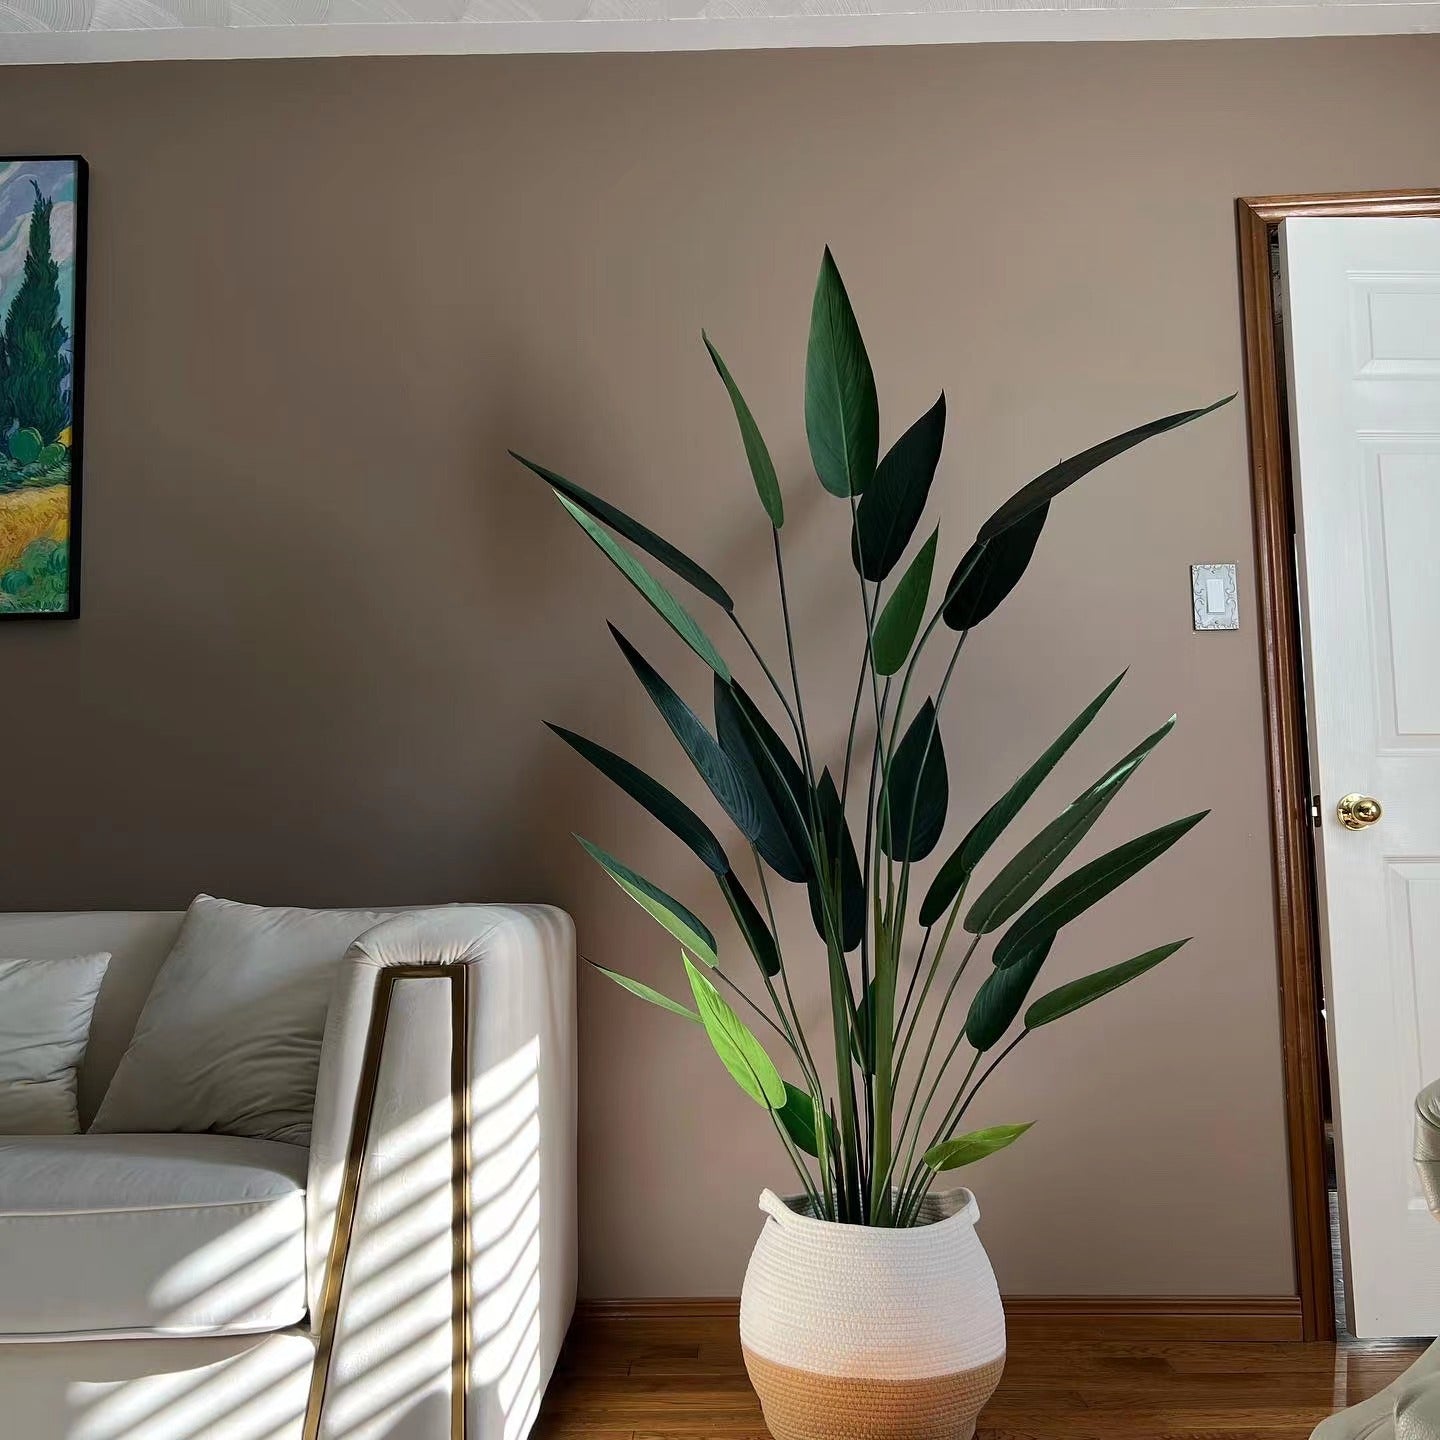 An Artificial Bird of Paradise in the living room.